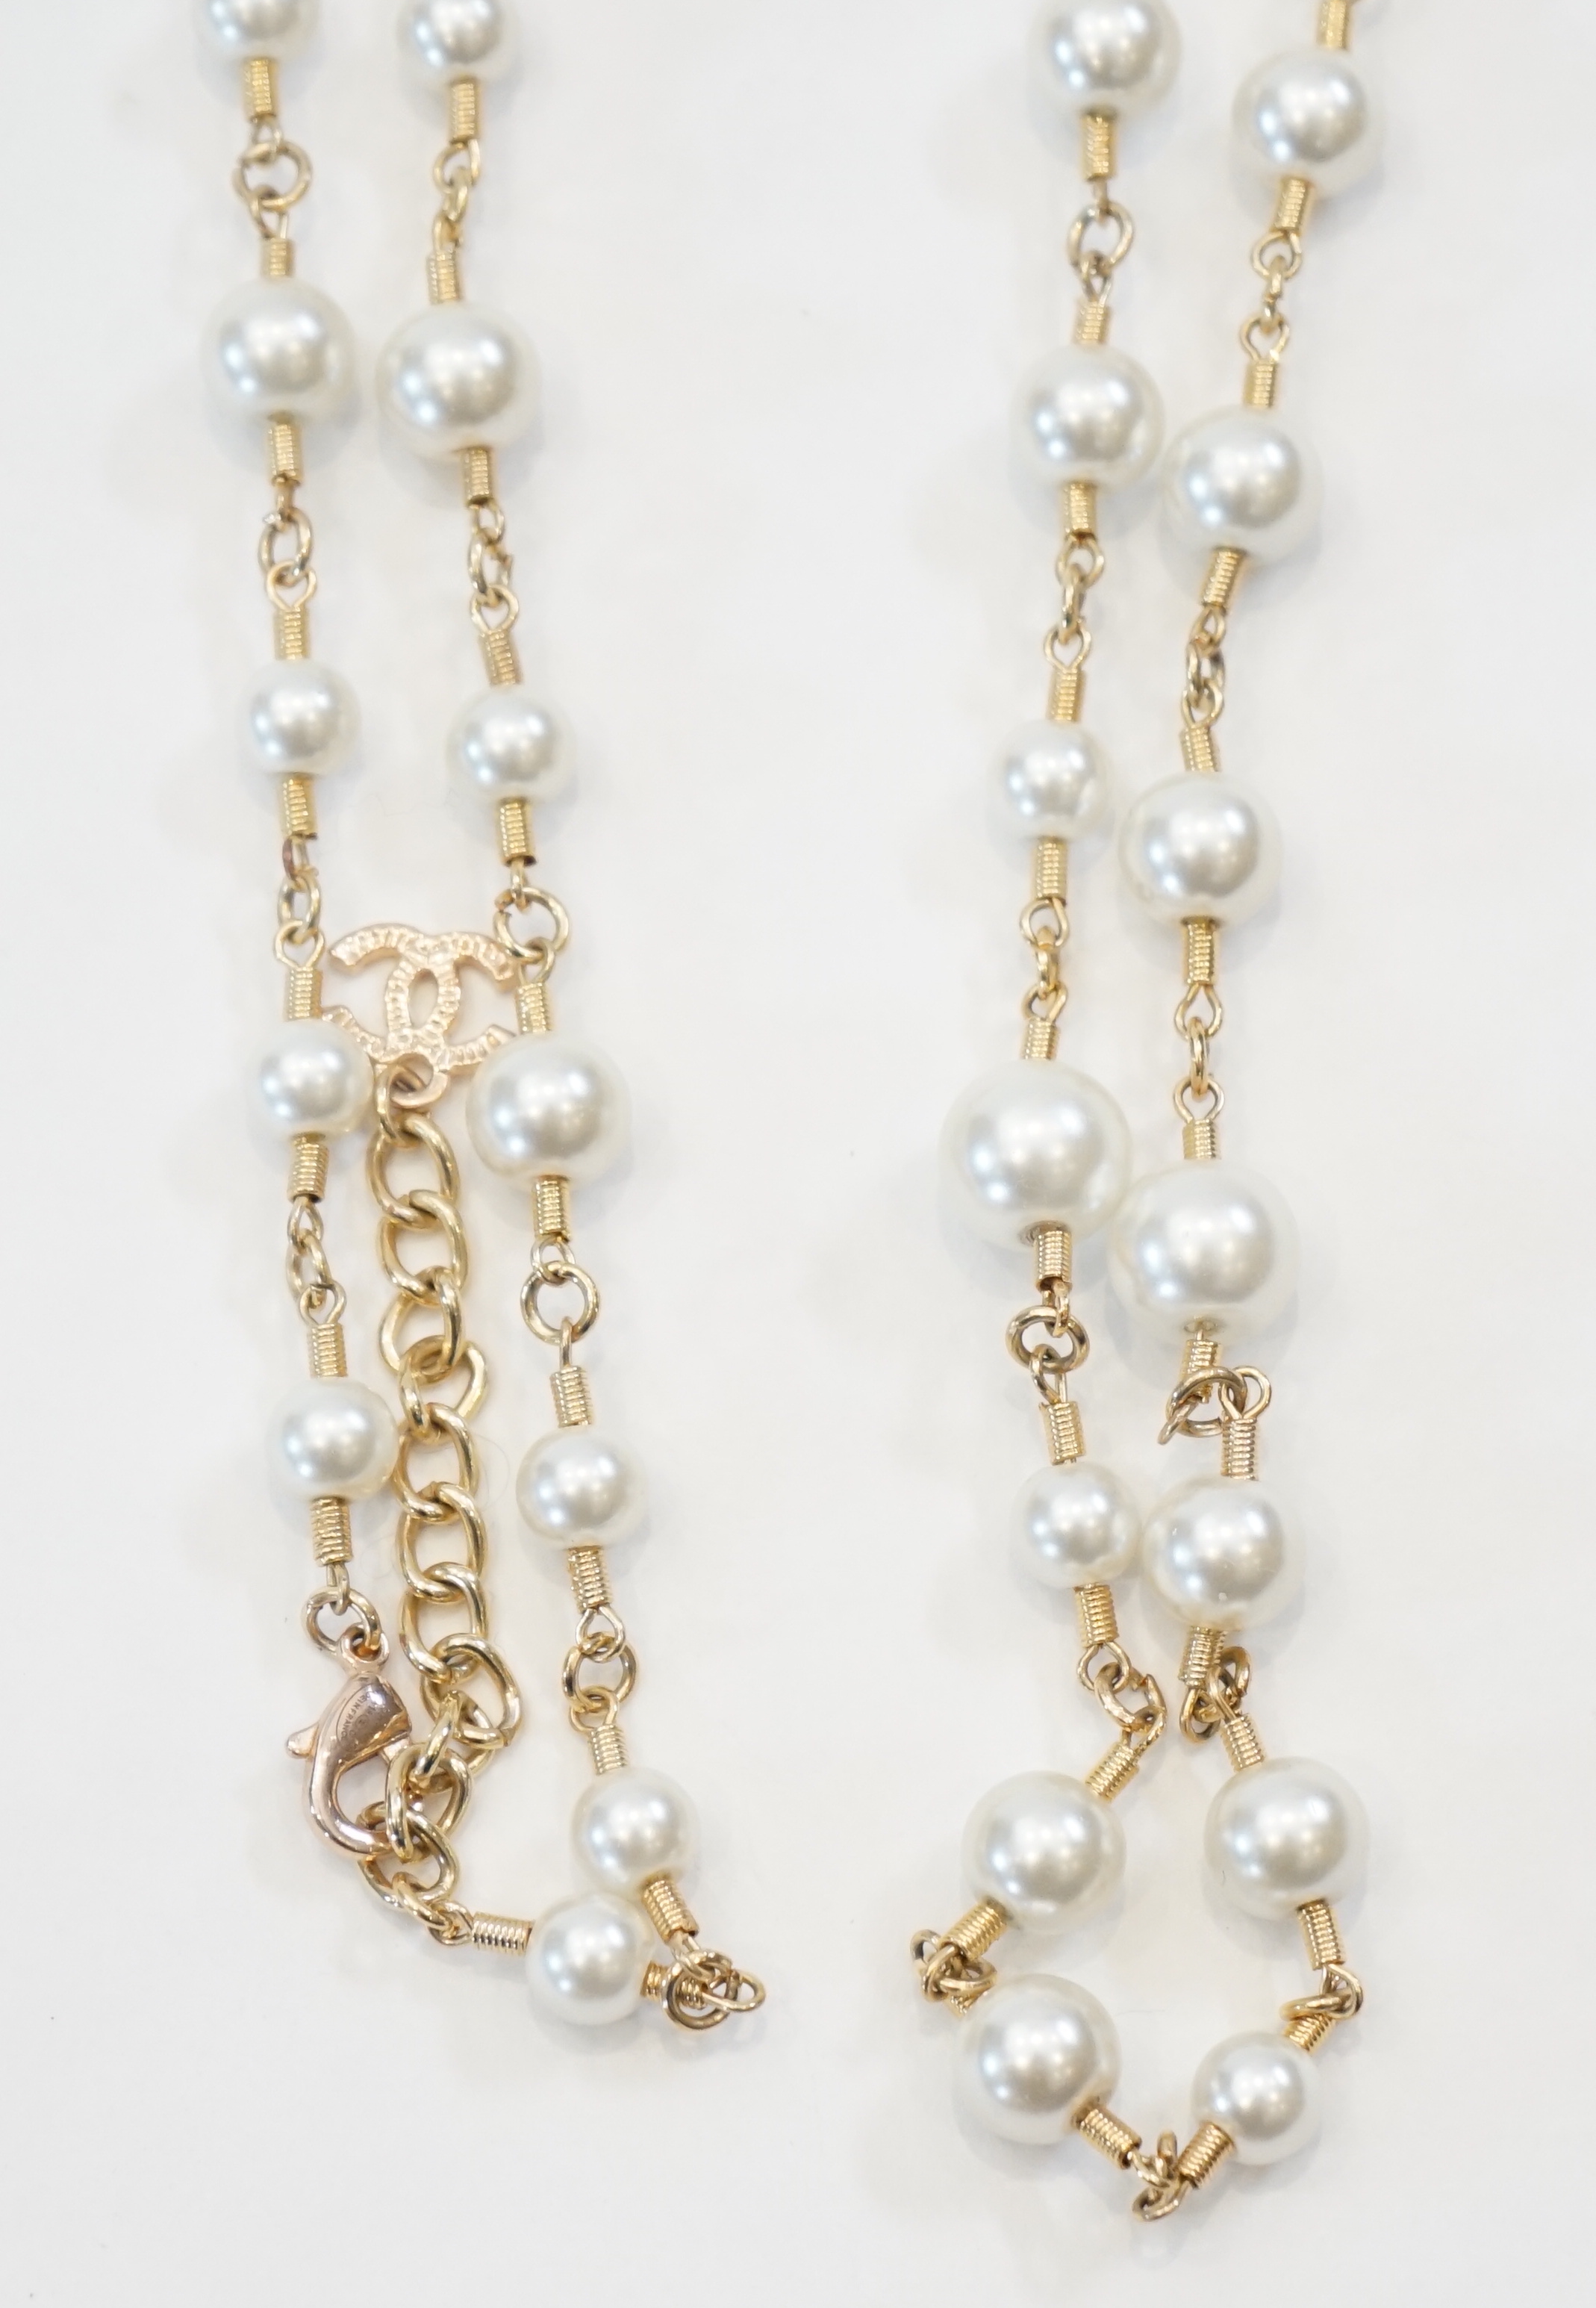 A Chanel gold plated 3 CC scatter pearl long necklace as seen in the film The Devil Wears Prada worn - Image 6 of 7